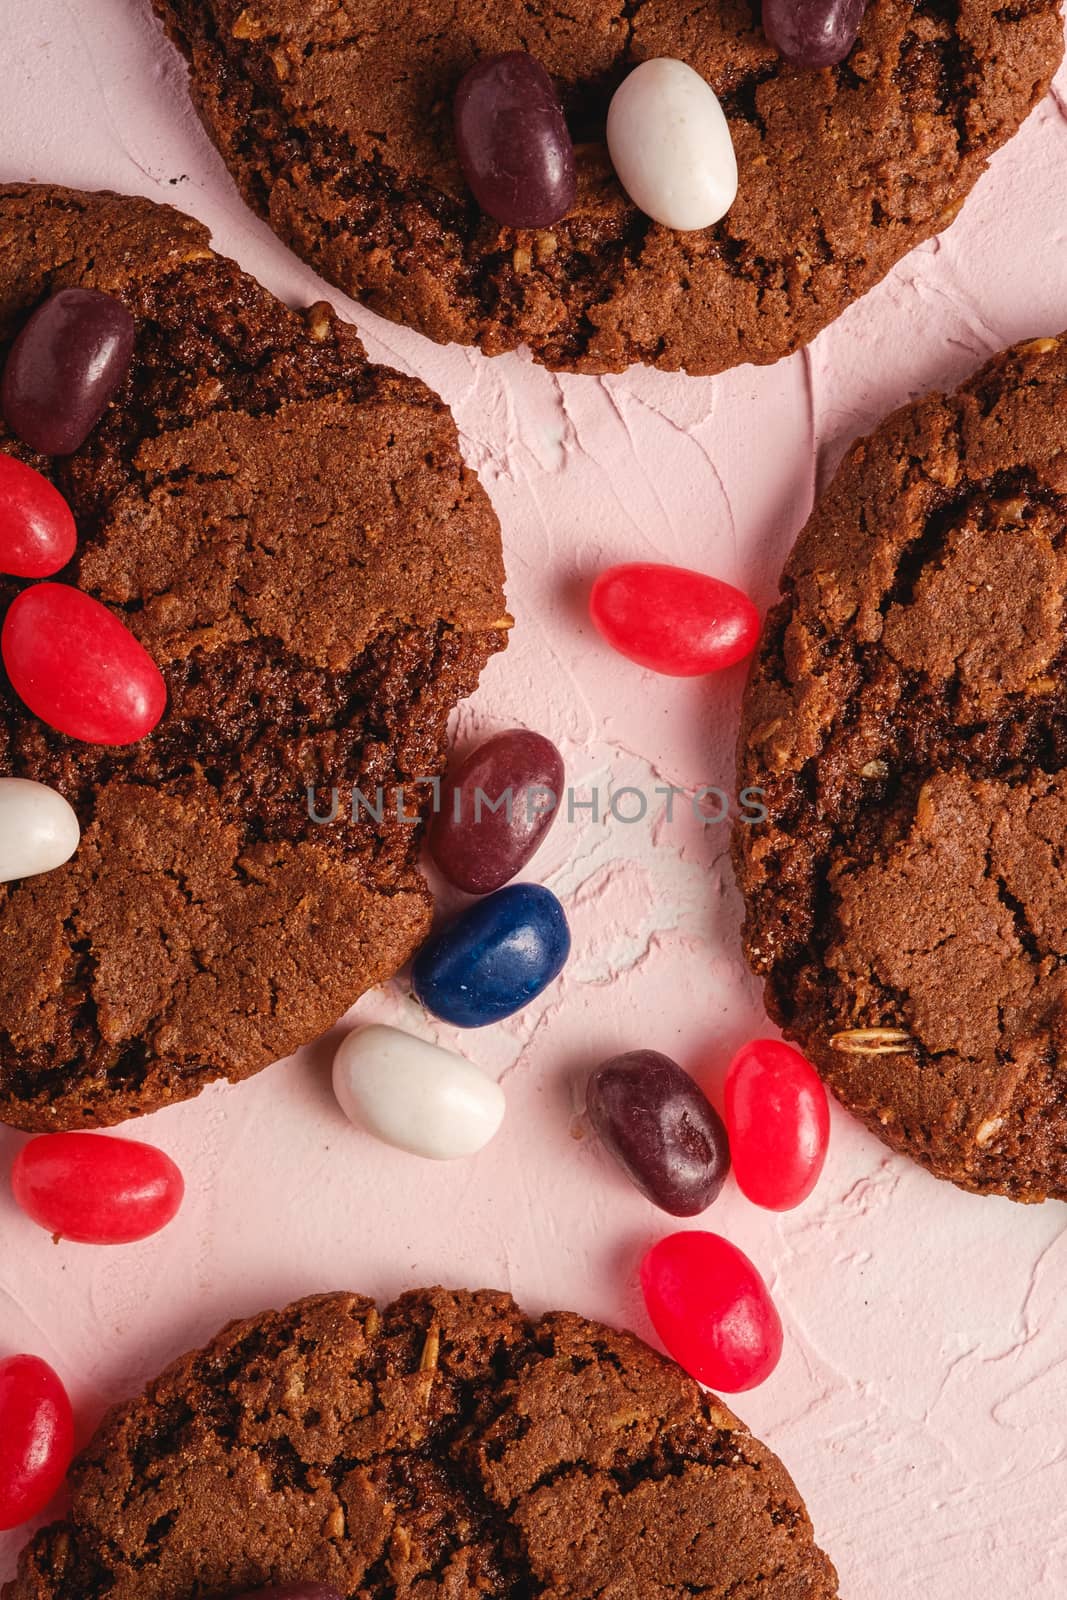 Homemade oat chocolate cookies with cereal with juicy jelly beans on textured pink background, top view macro